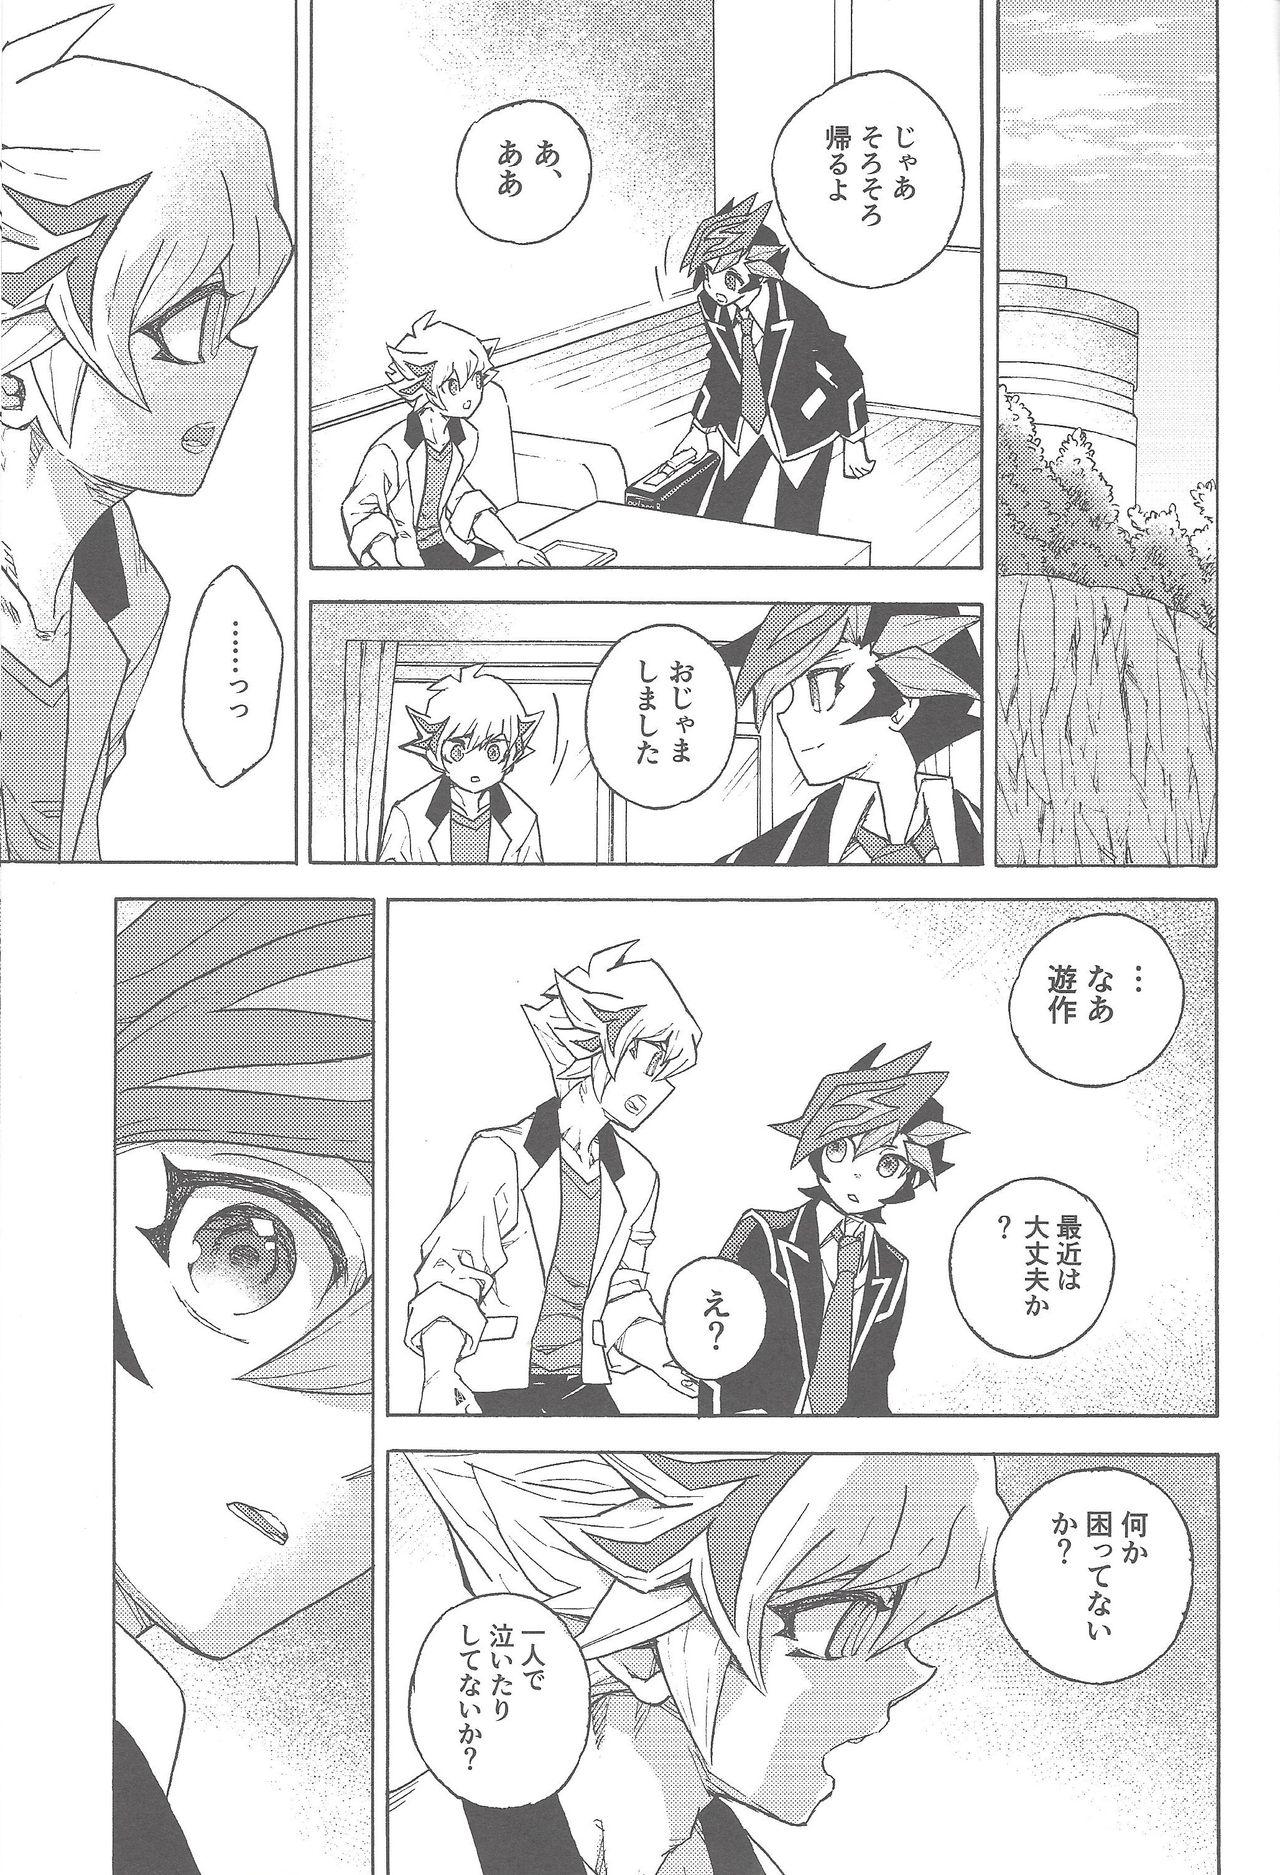 Office Sex twoway traffic - Yu-gi-oh vrains Strip - Page 2